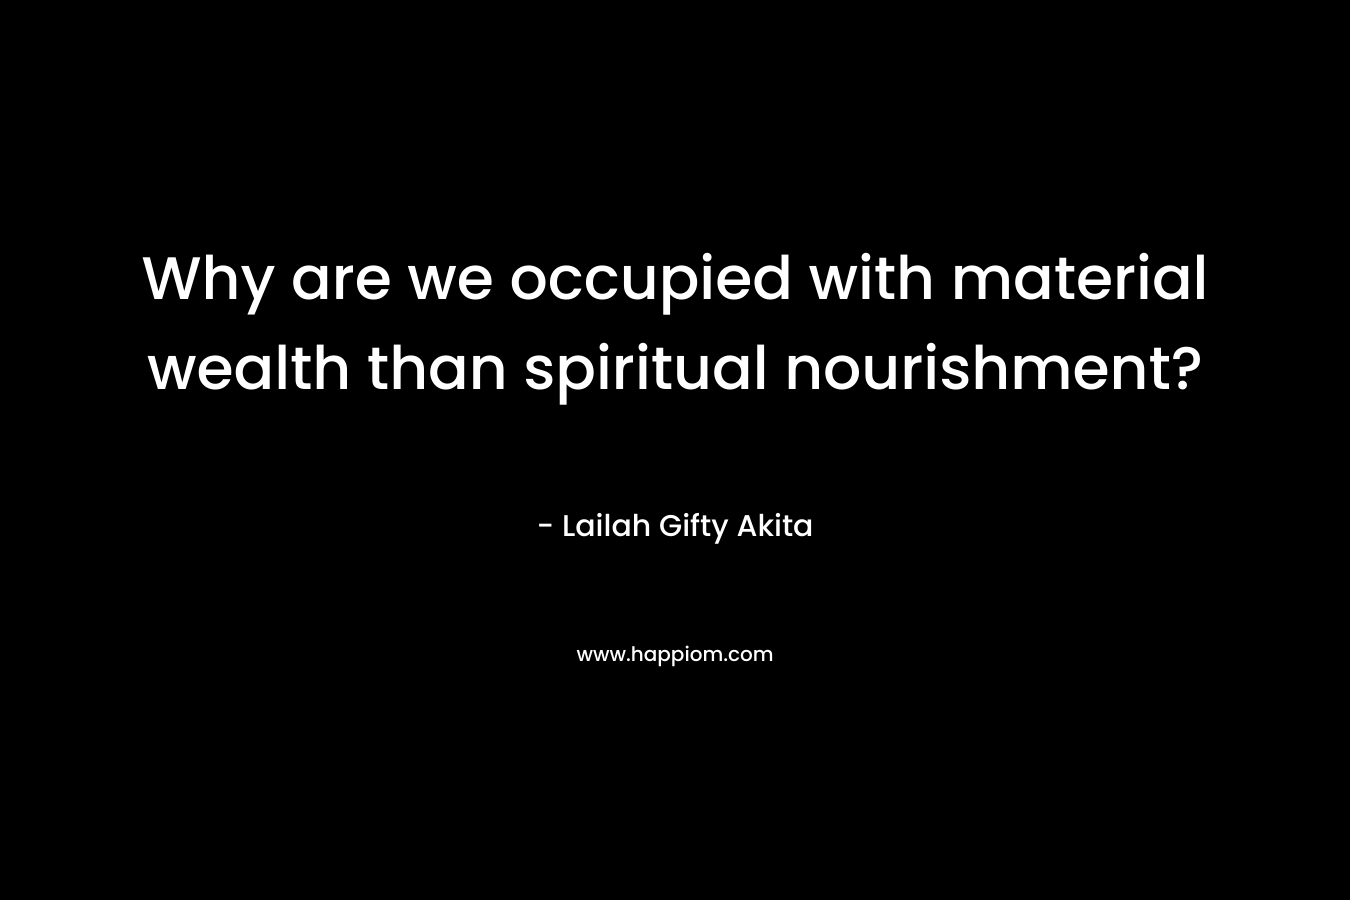 Why are we occupied with material wealth than spiritual nourishment? – Lailah Gifty Akita